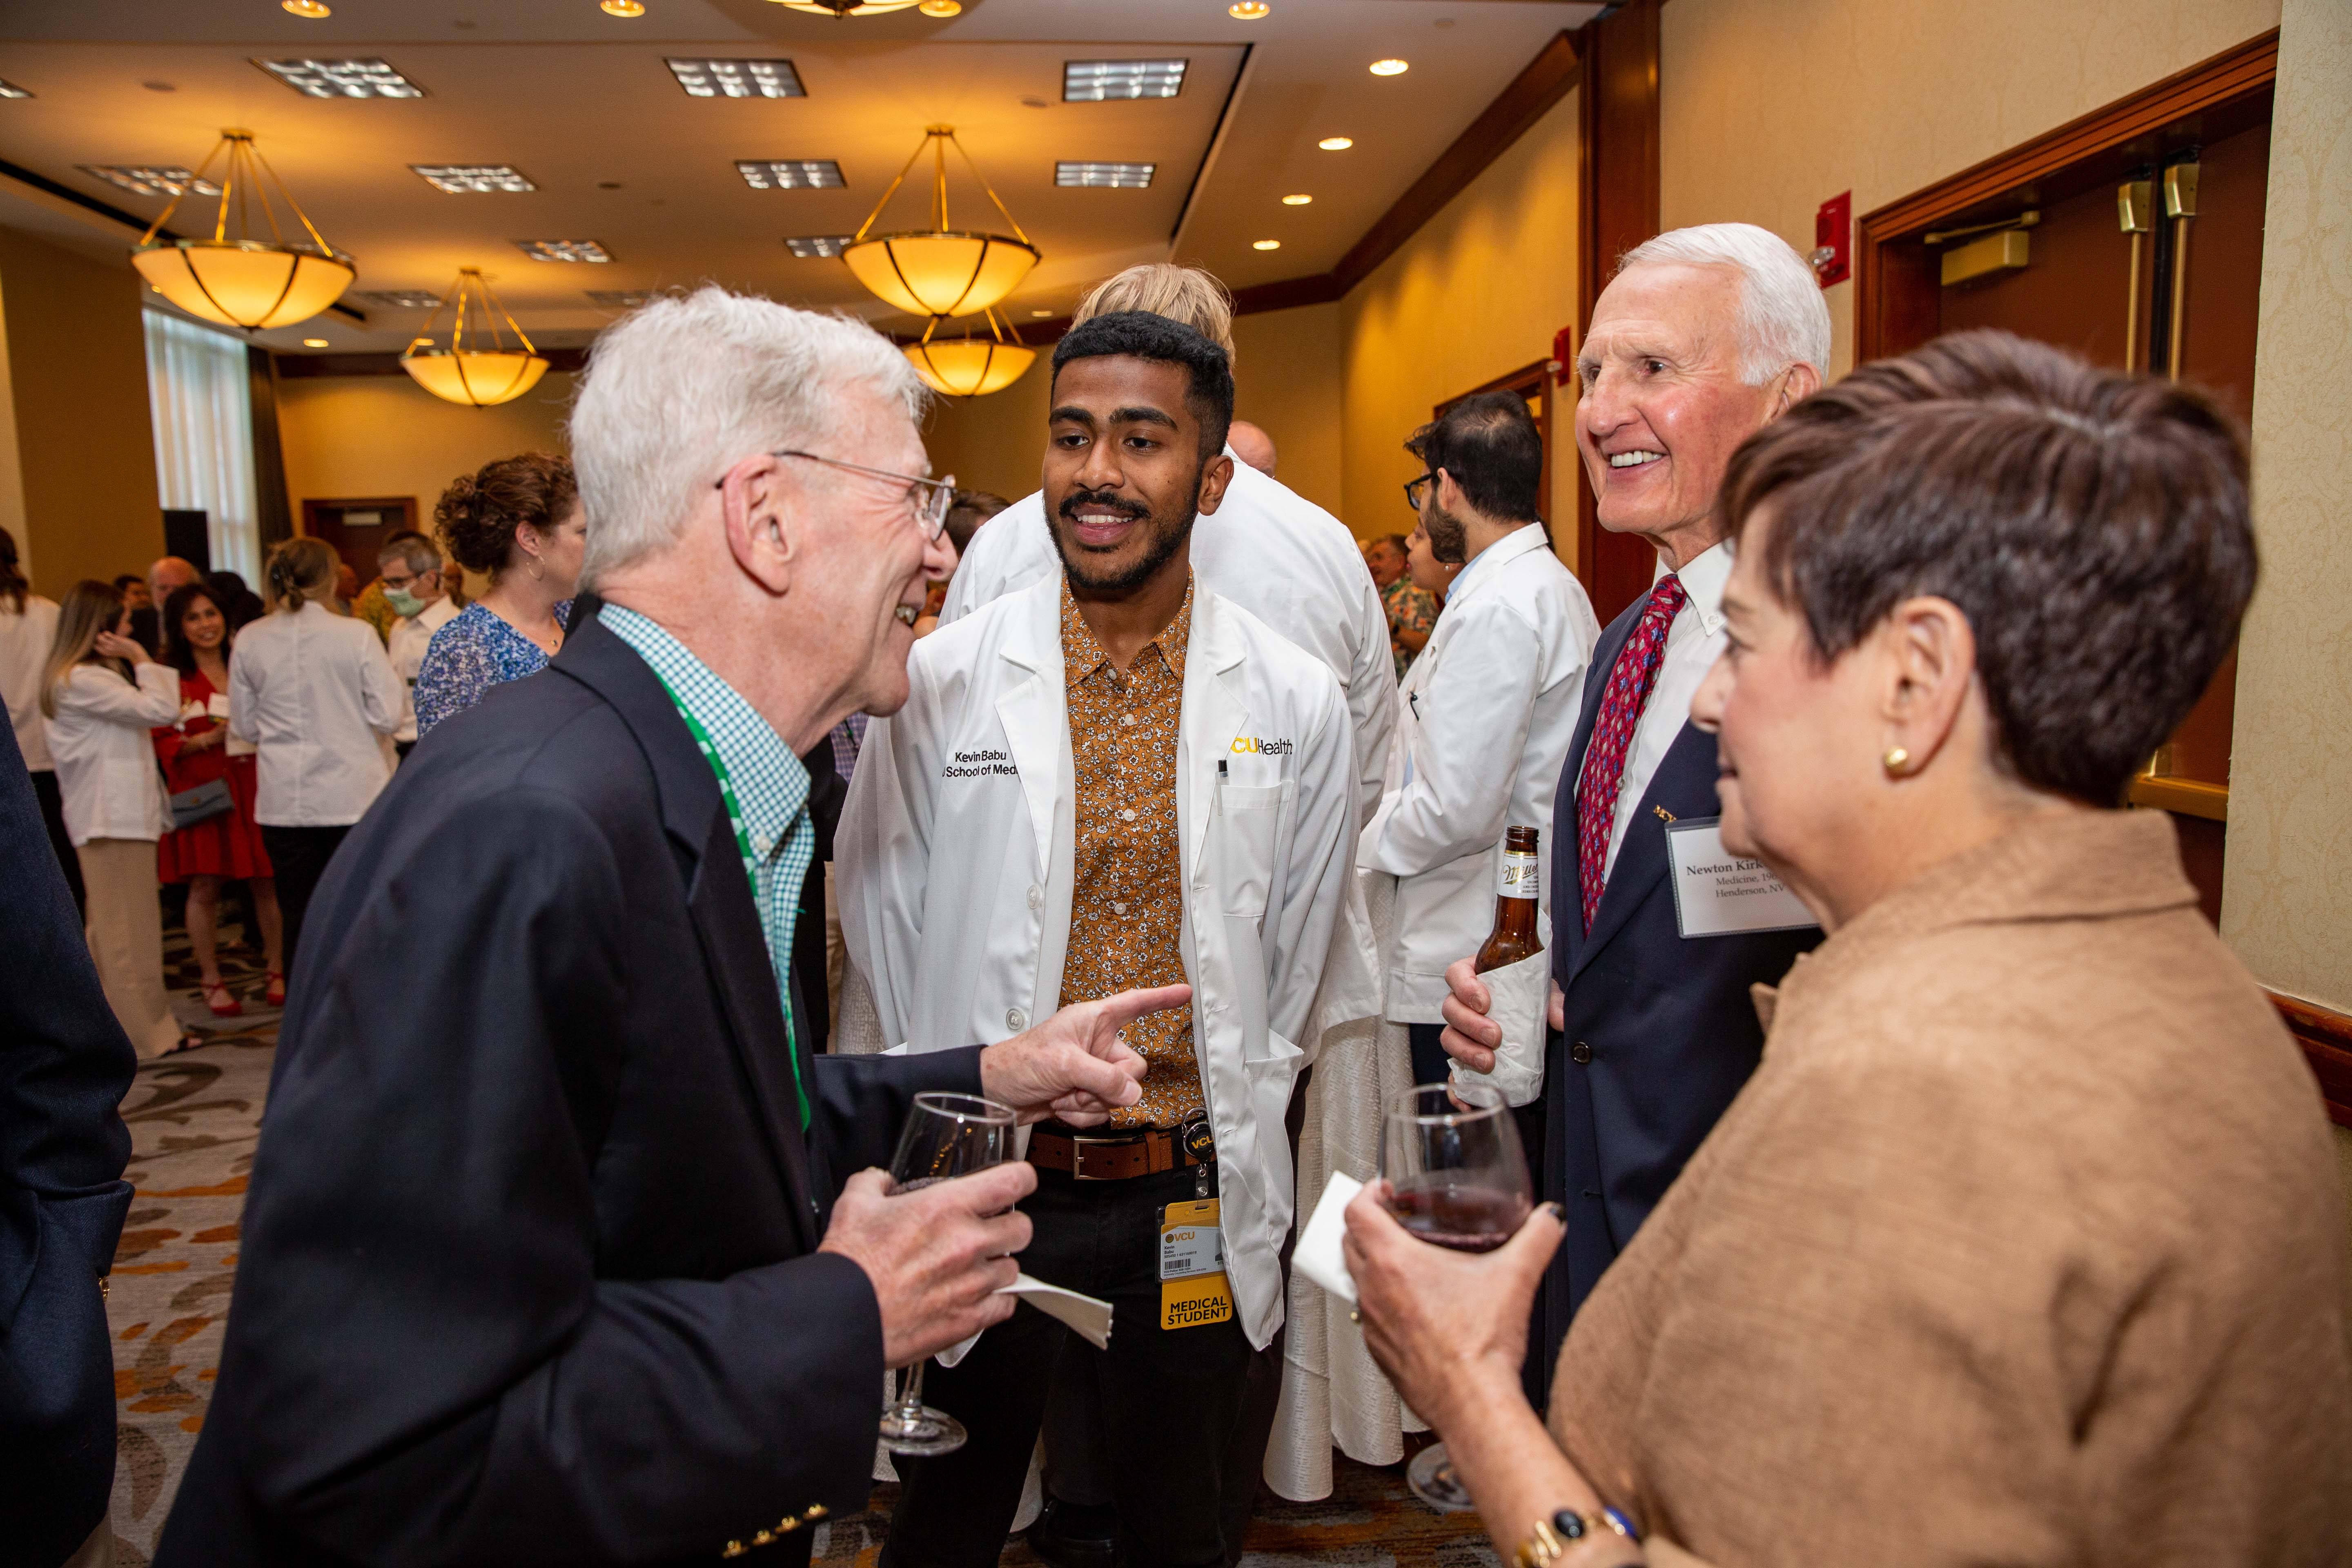  Alumni smile and talk with a medical student wearing a white coat 